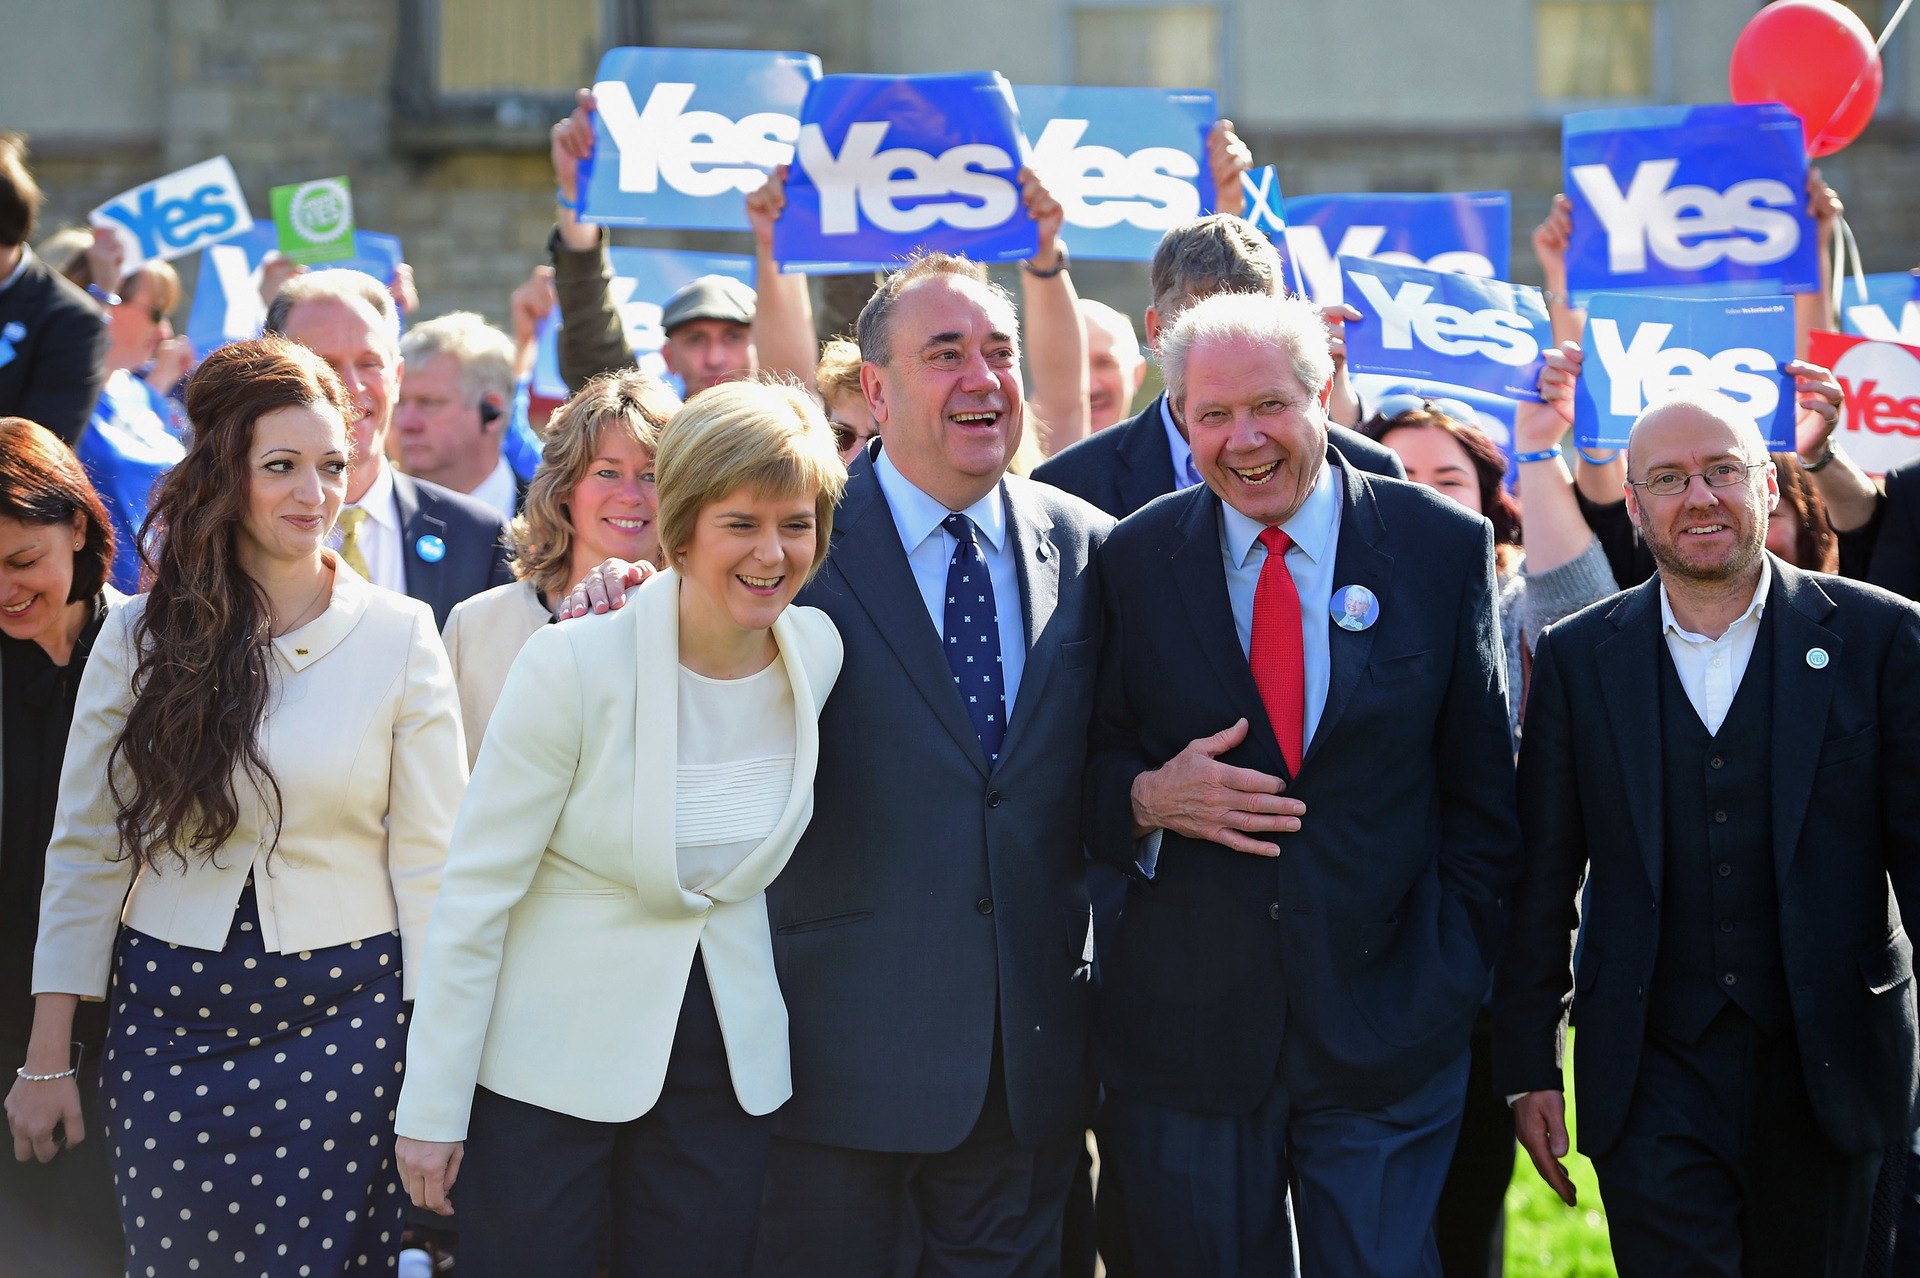 Deputy First Minister Nicola Sturgeon, First Minister Alex Salmond and former deputy leader of the SNP Jim Sillars campaign with activists in 2014.